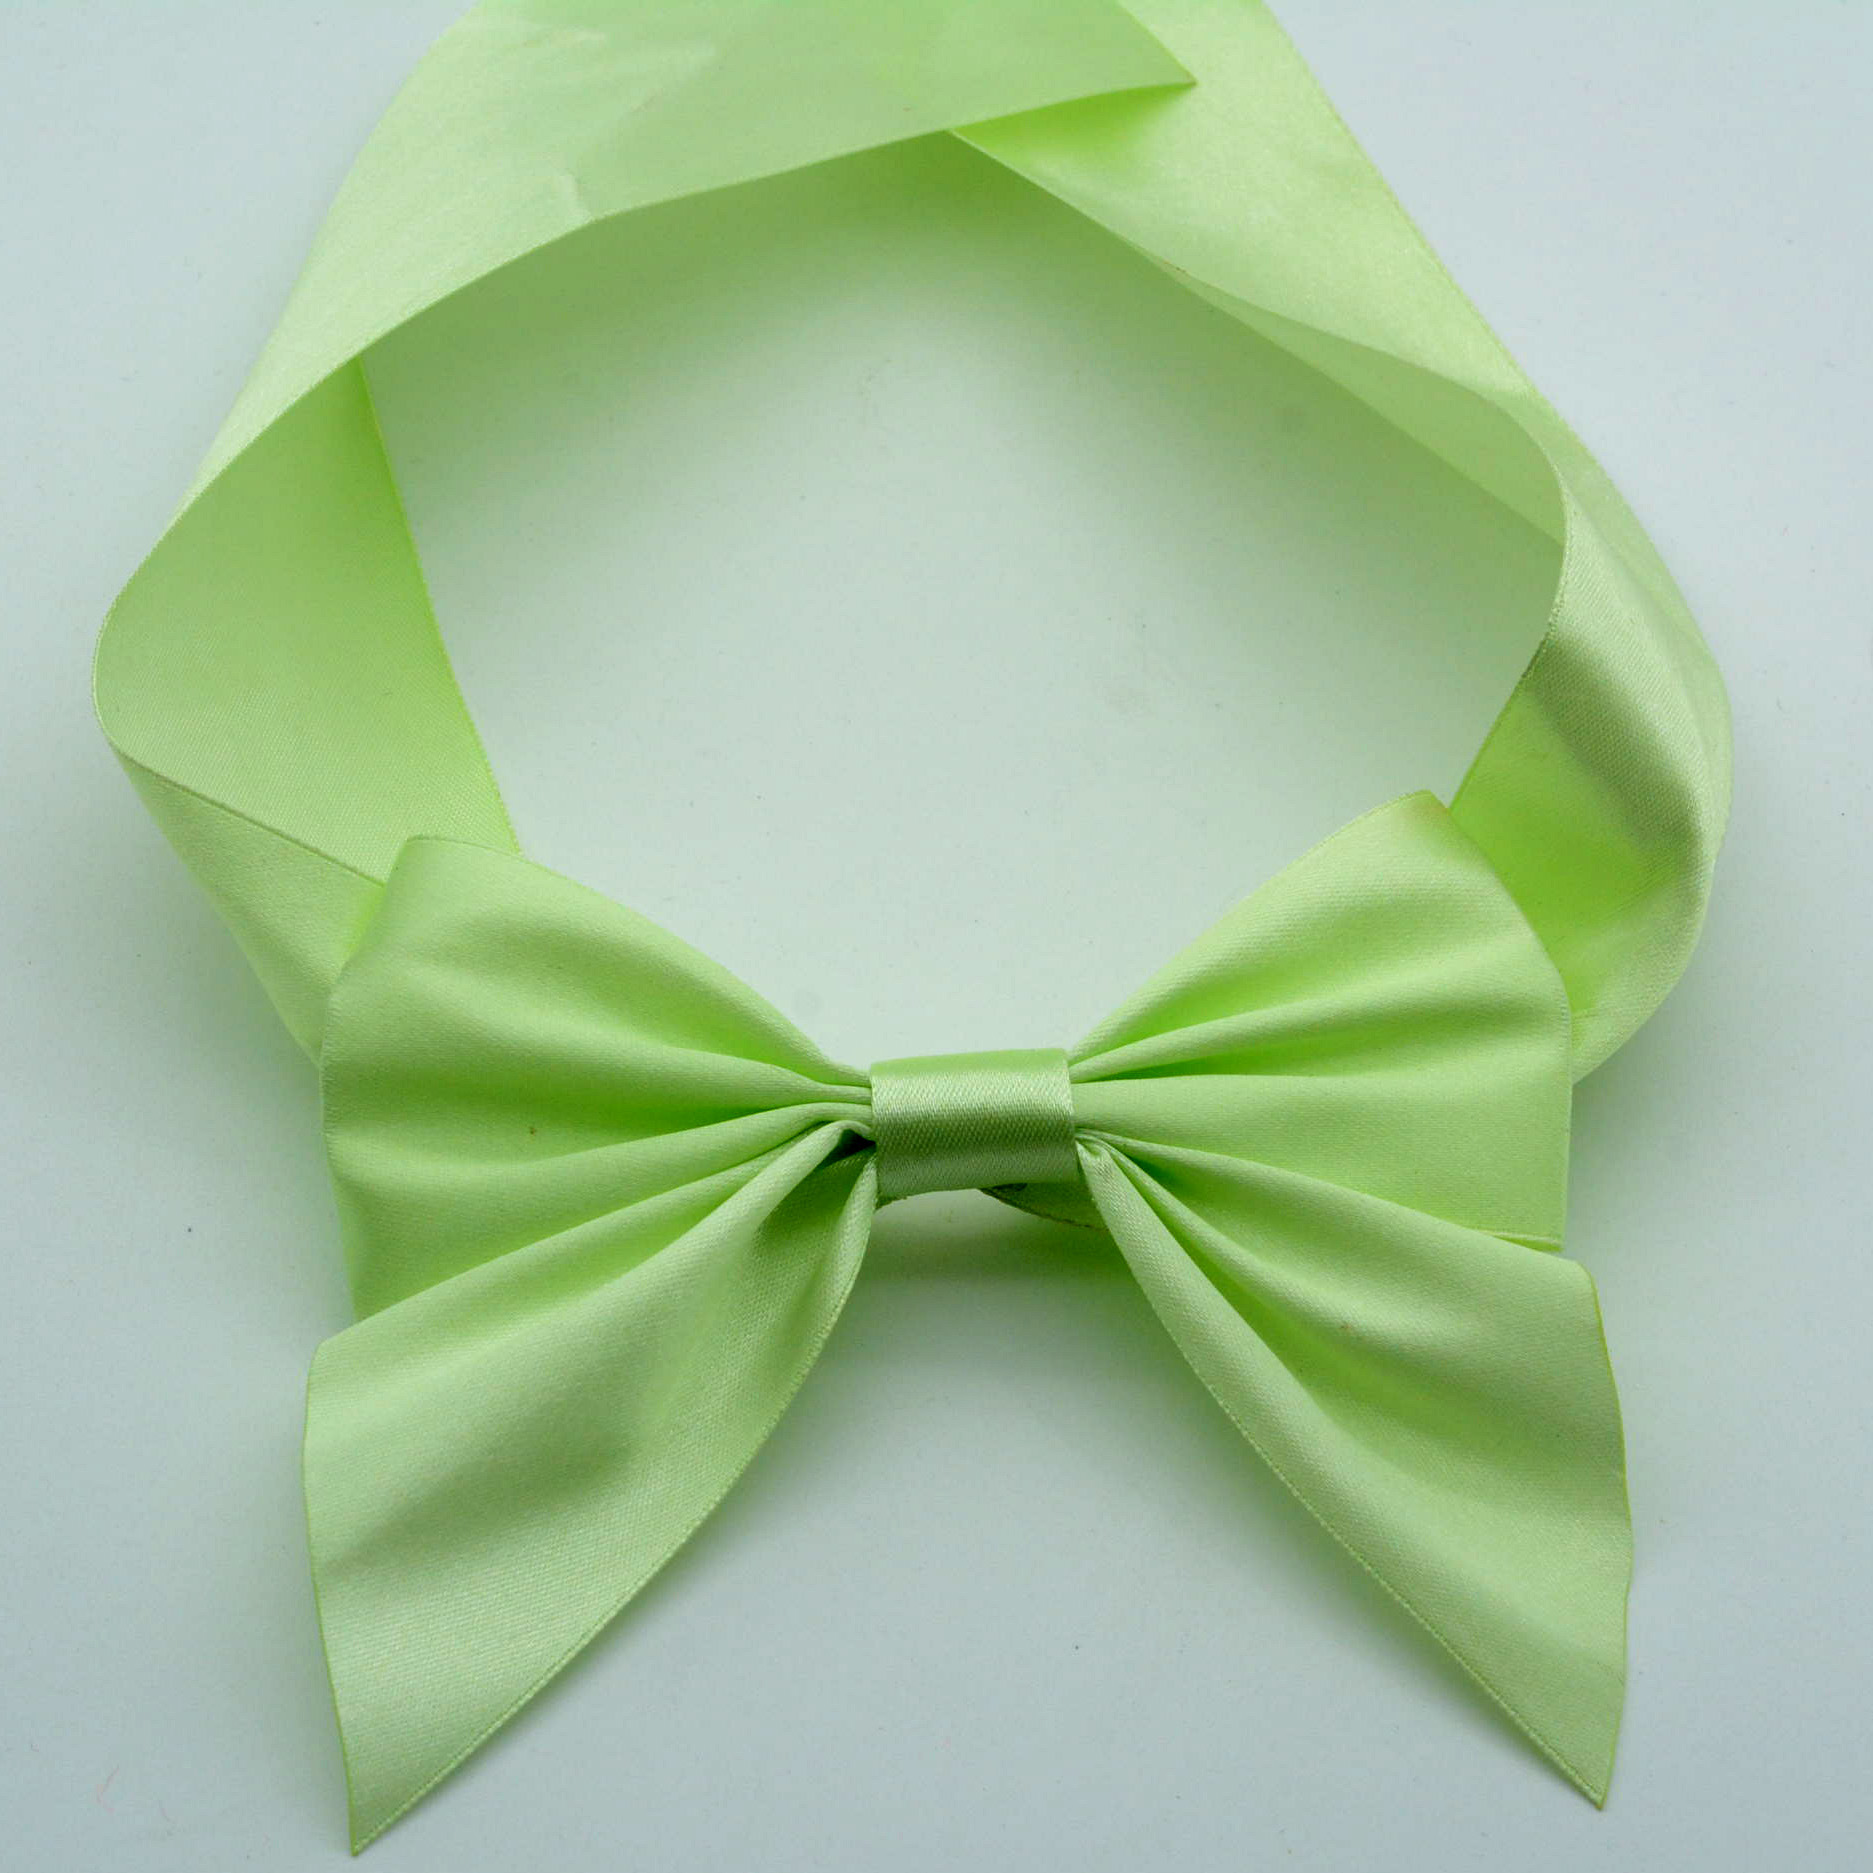 New Style Satin Ribbon Bow for Festival and Party Supplies